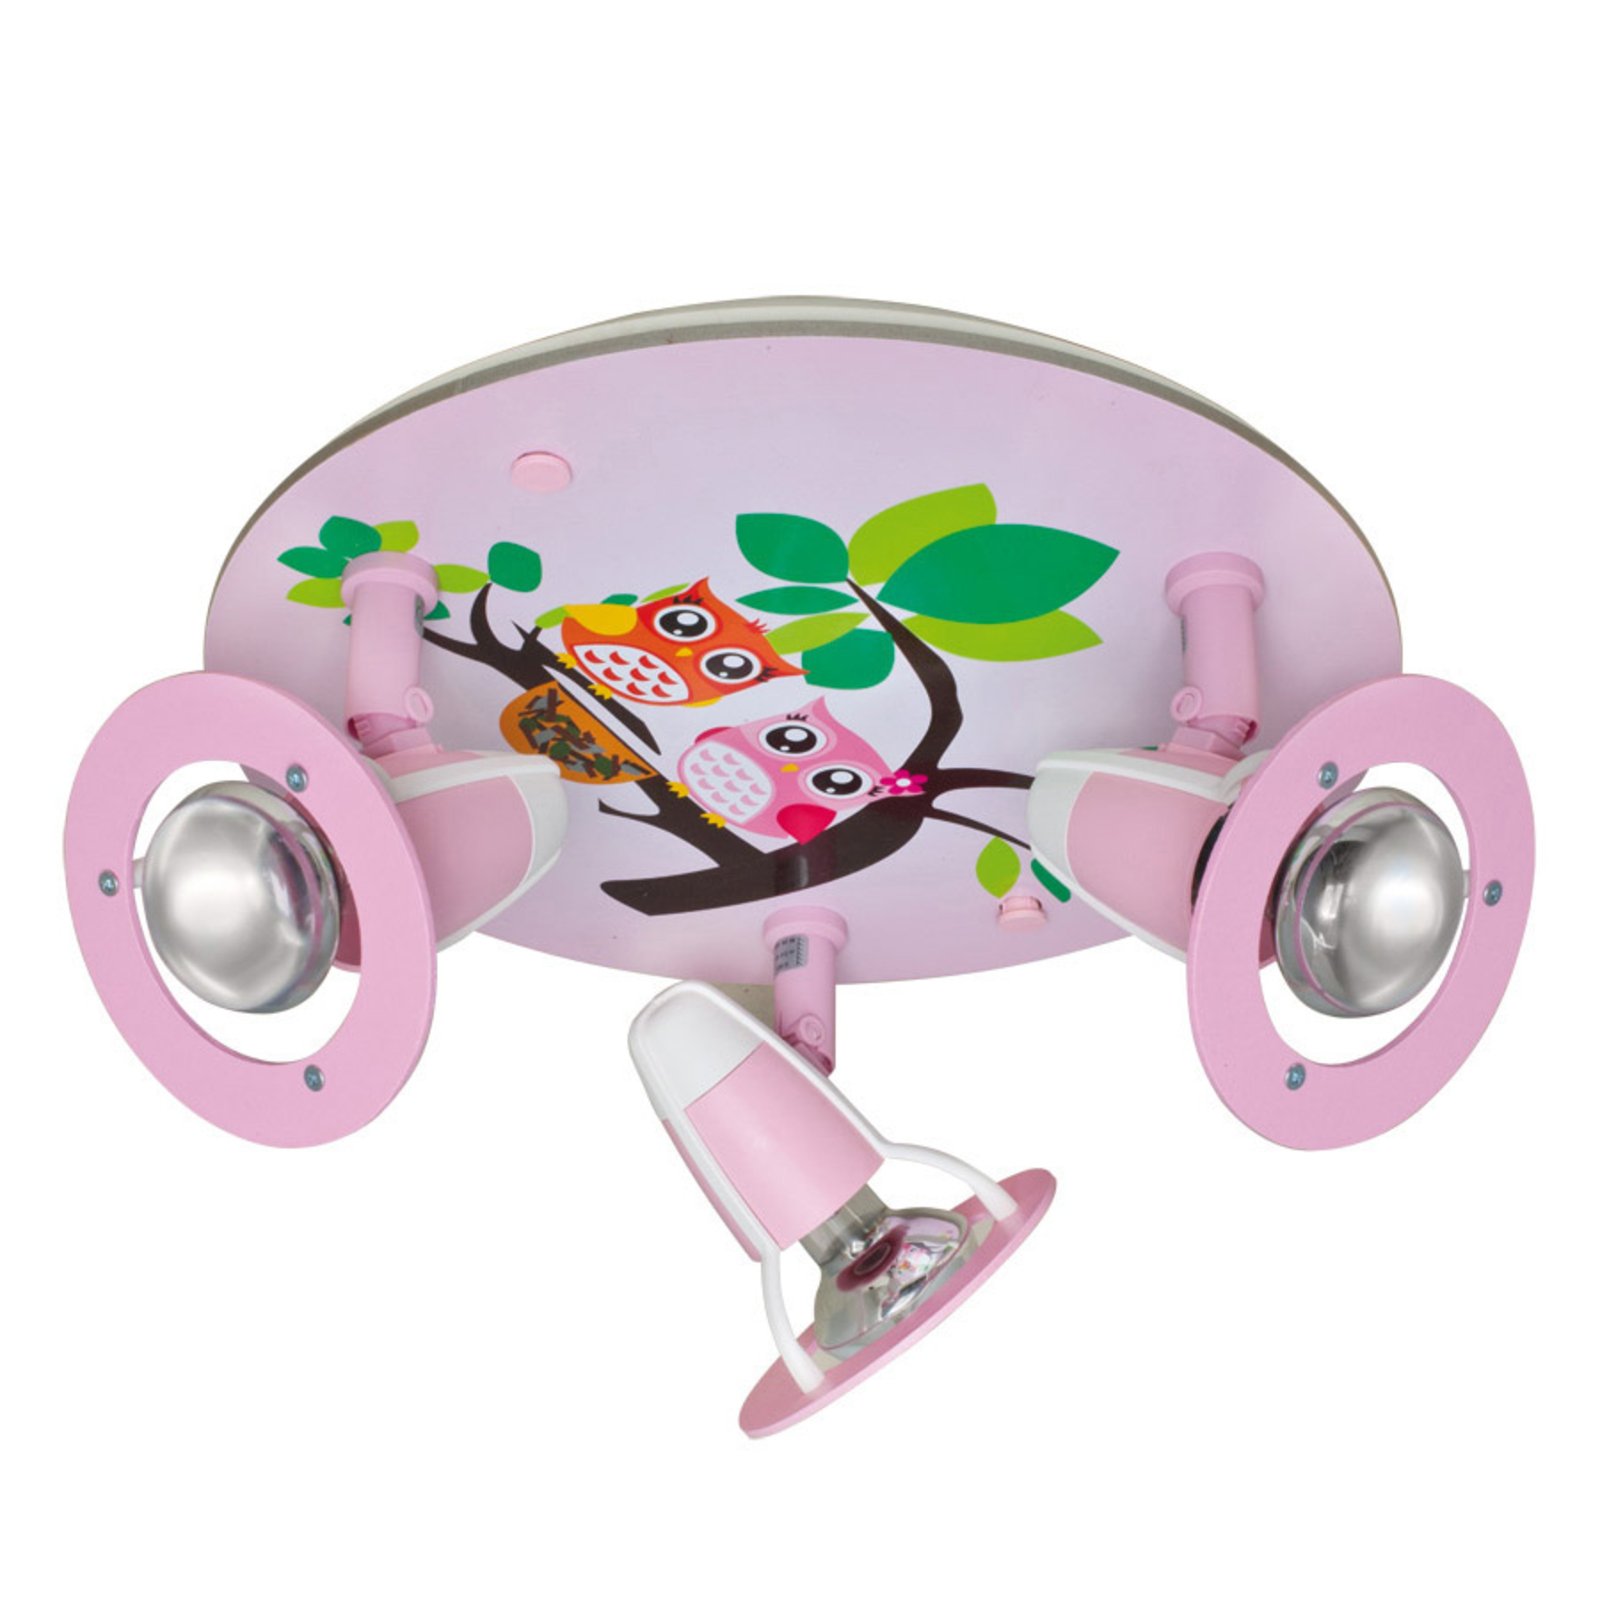 Owl ceiling light for a child’s room, pink